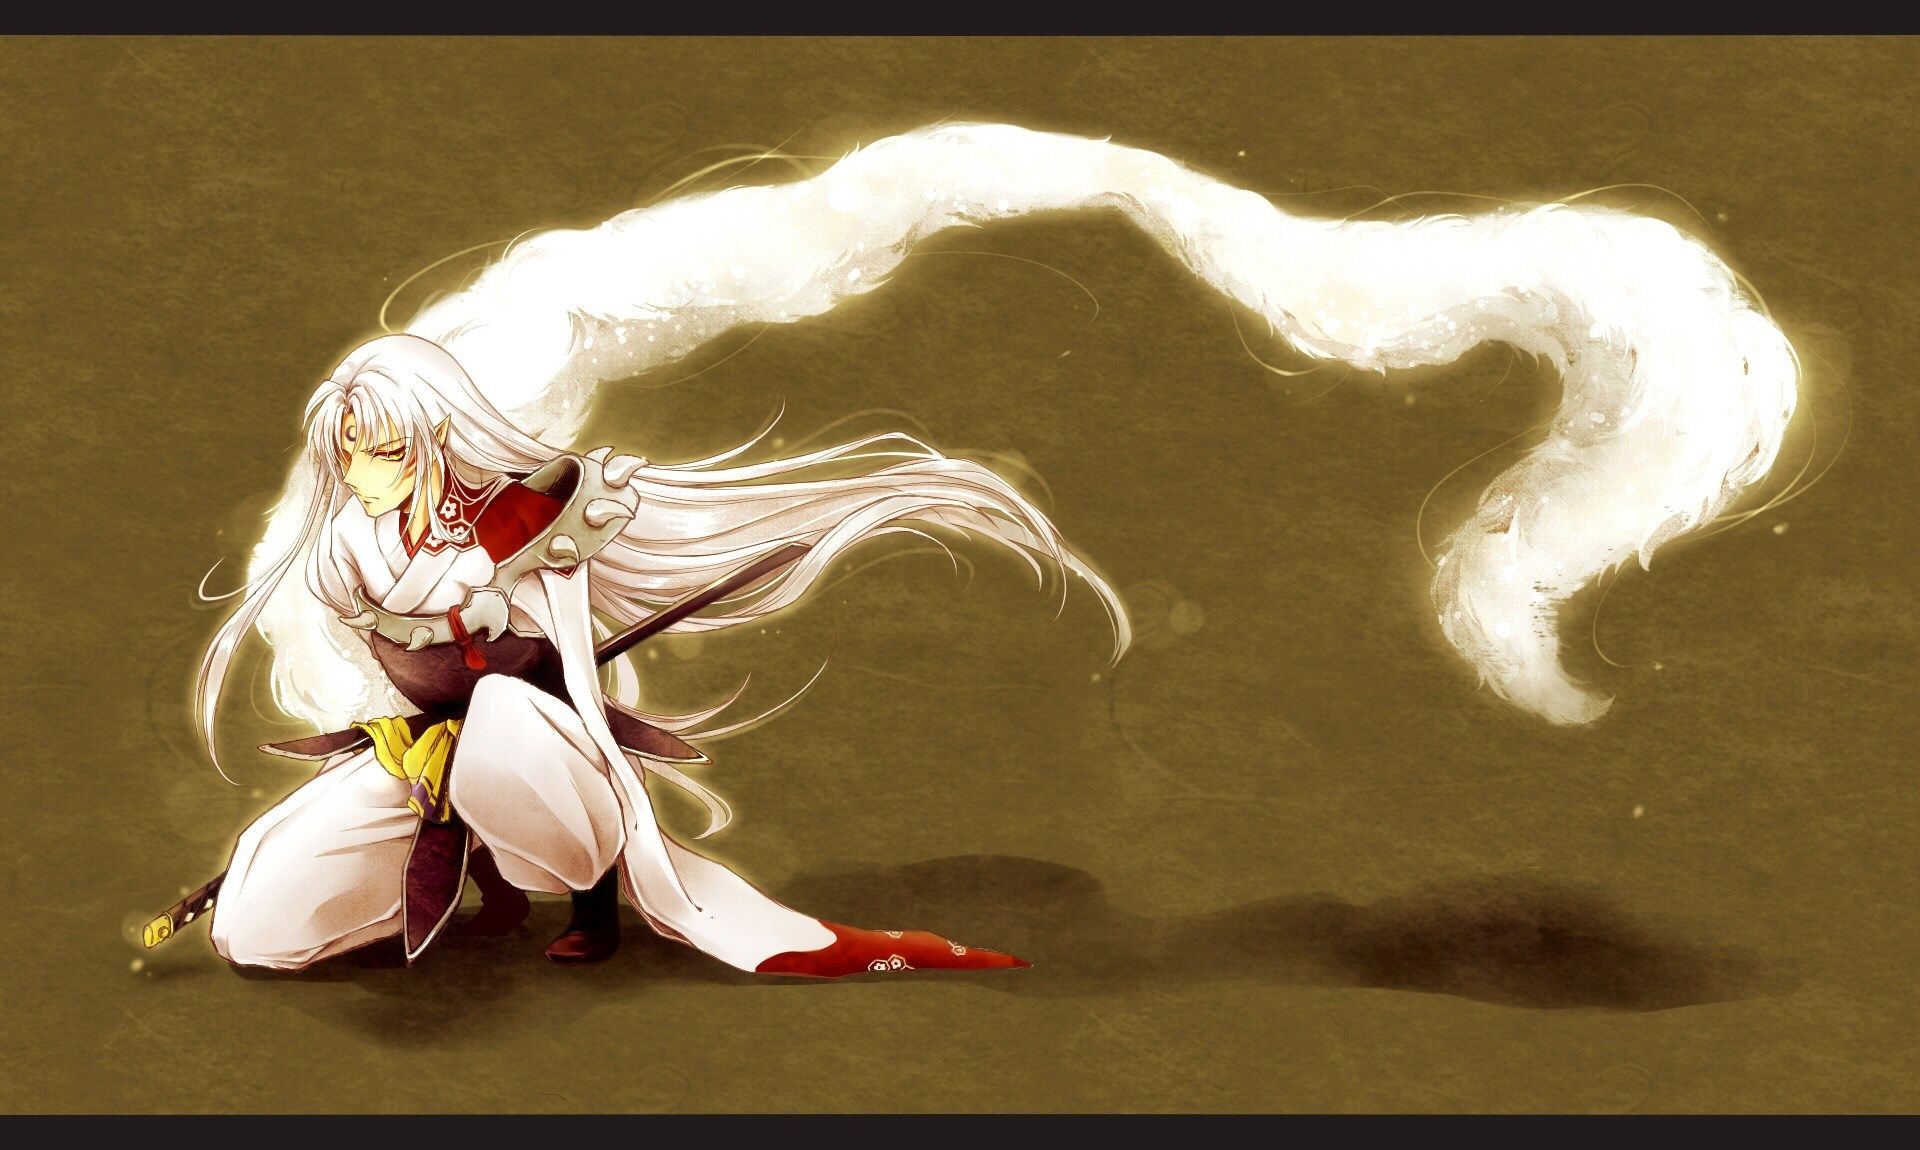 1920x1150 free inuyasha wallpapers download